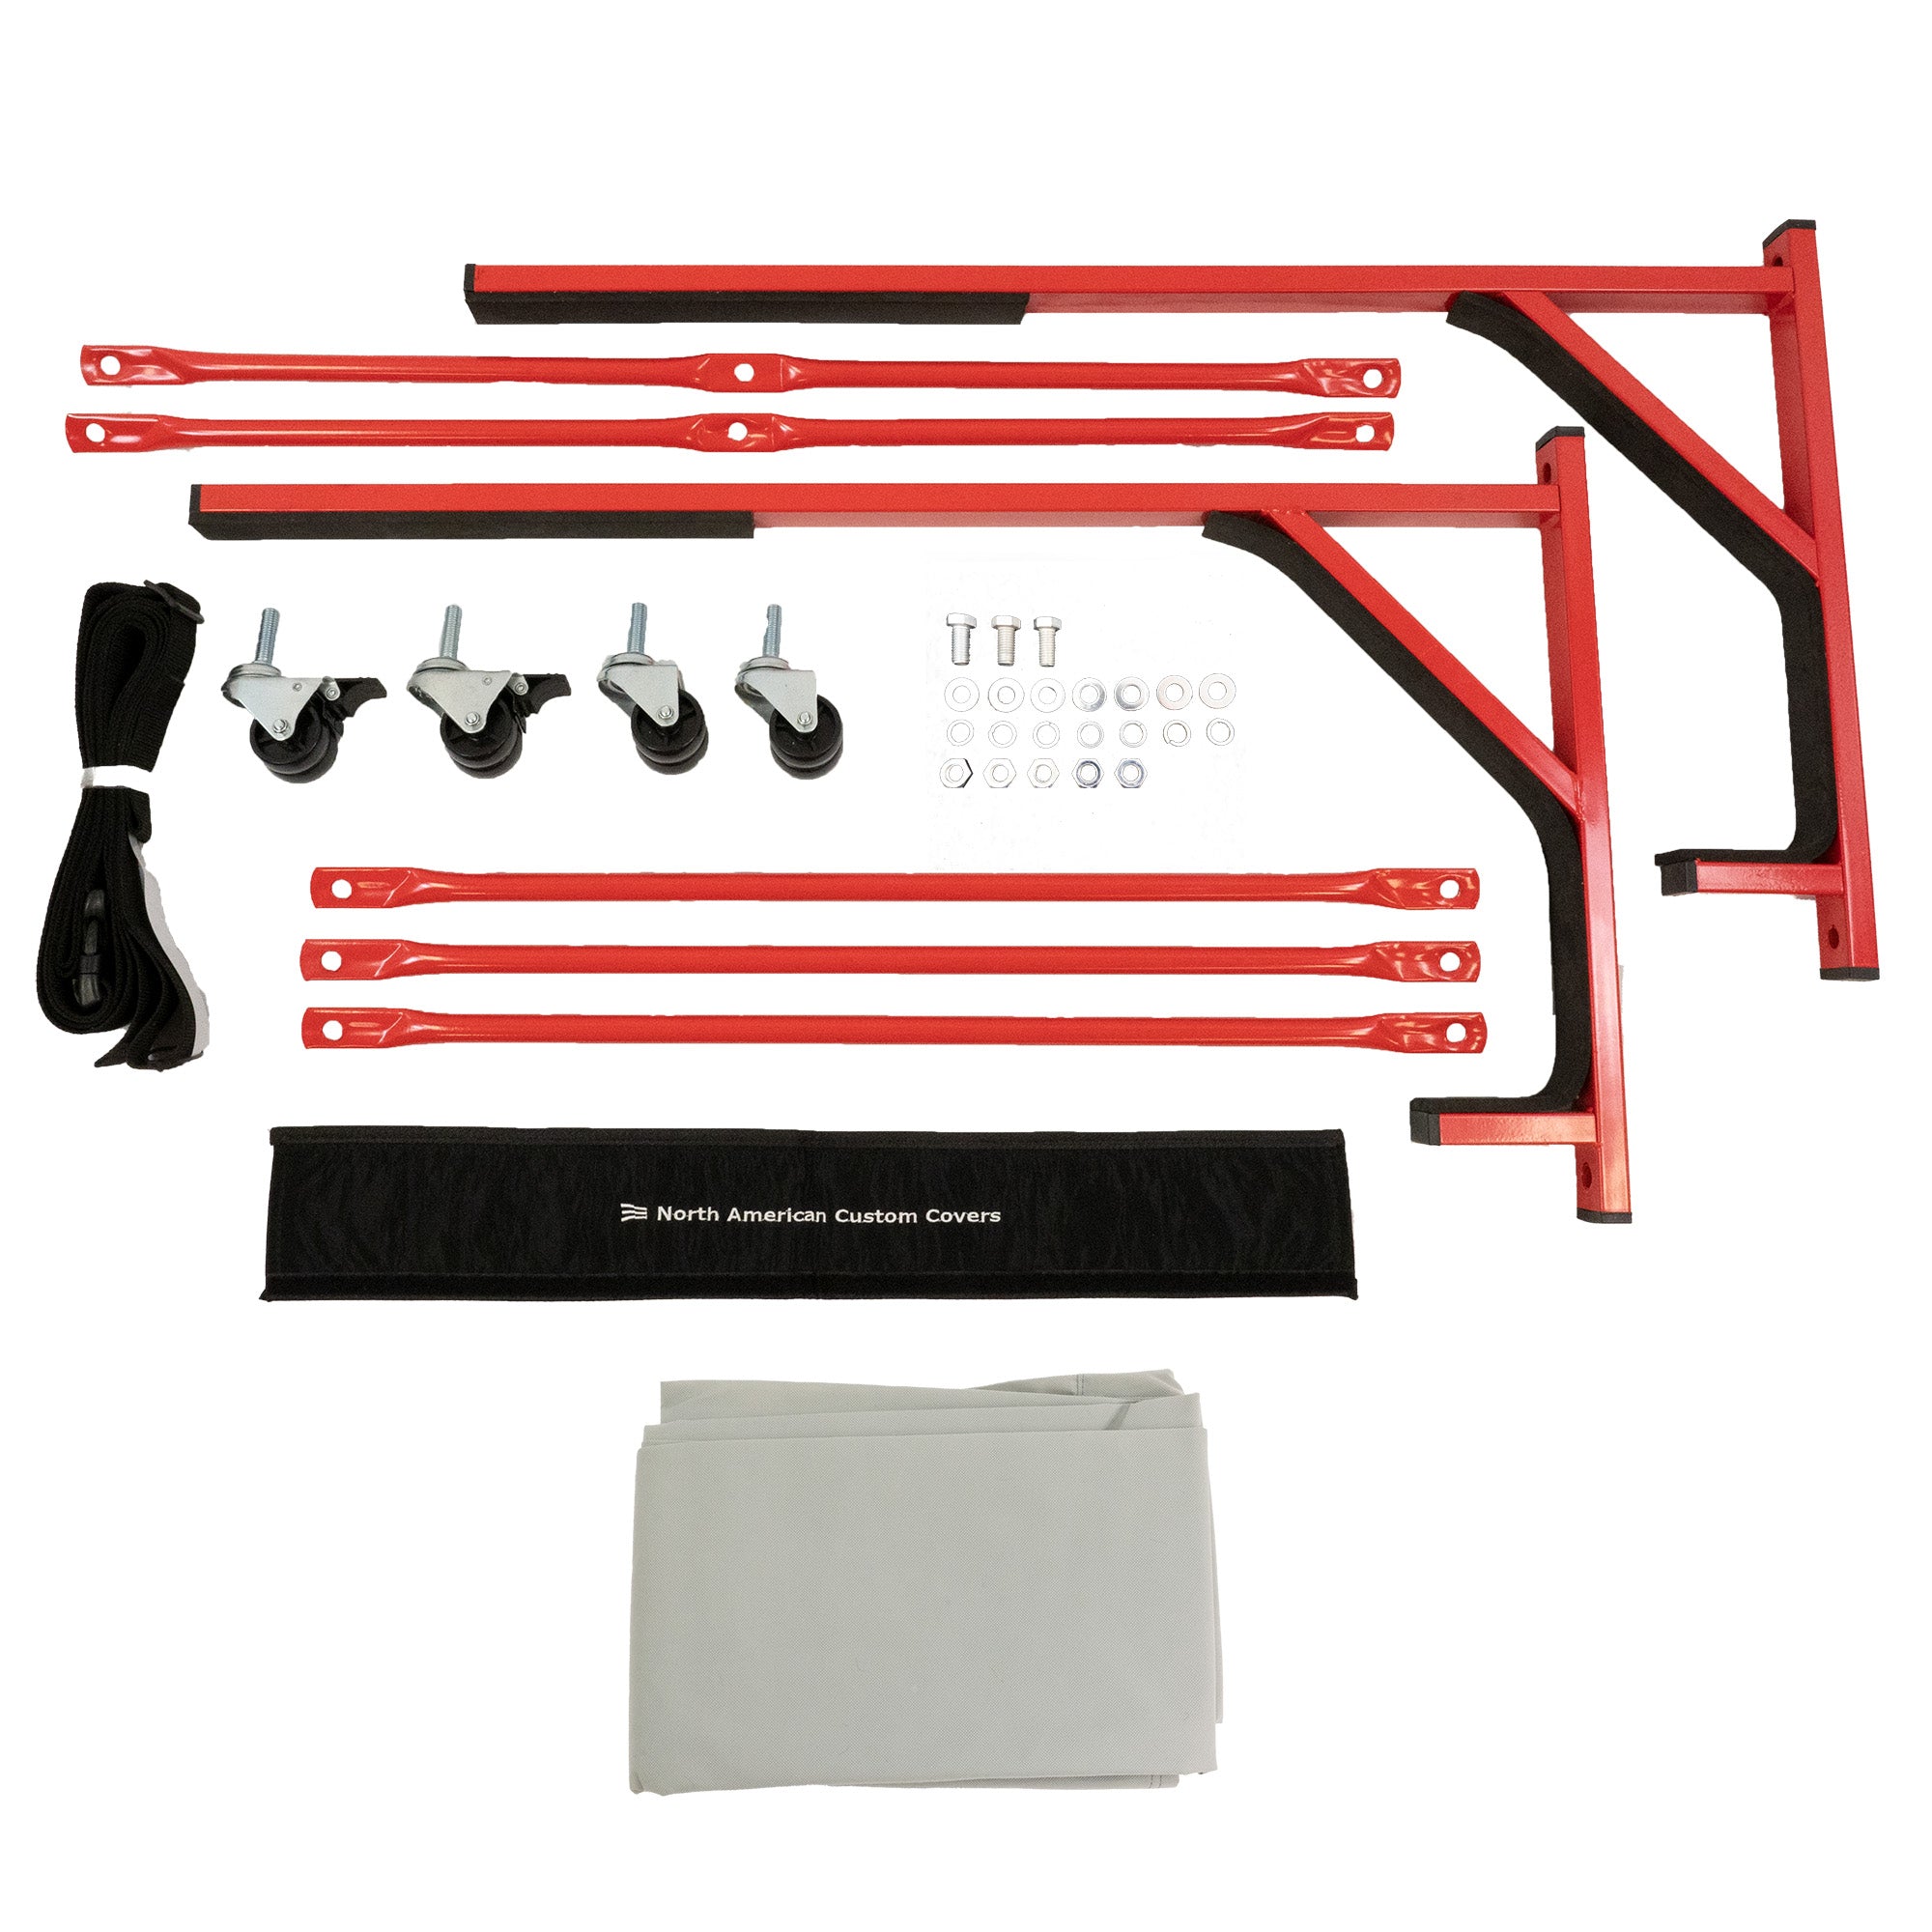 Fiat 124 Sport Spider Heavy-duty Hardtop Stand Trolley Cart Rack (Red) with Securing Harness and Hard Top Dust Cover (050R)